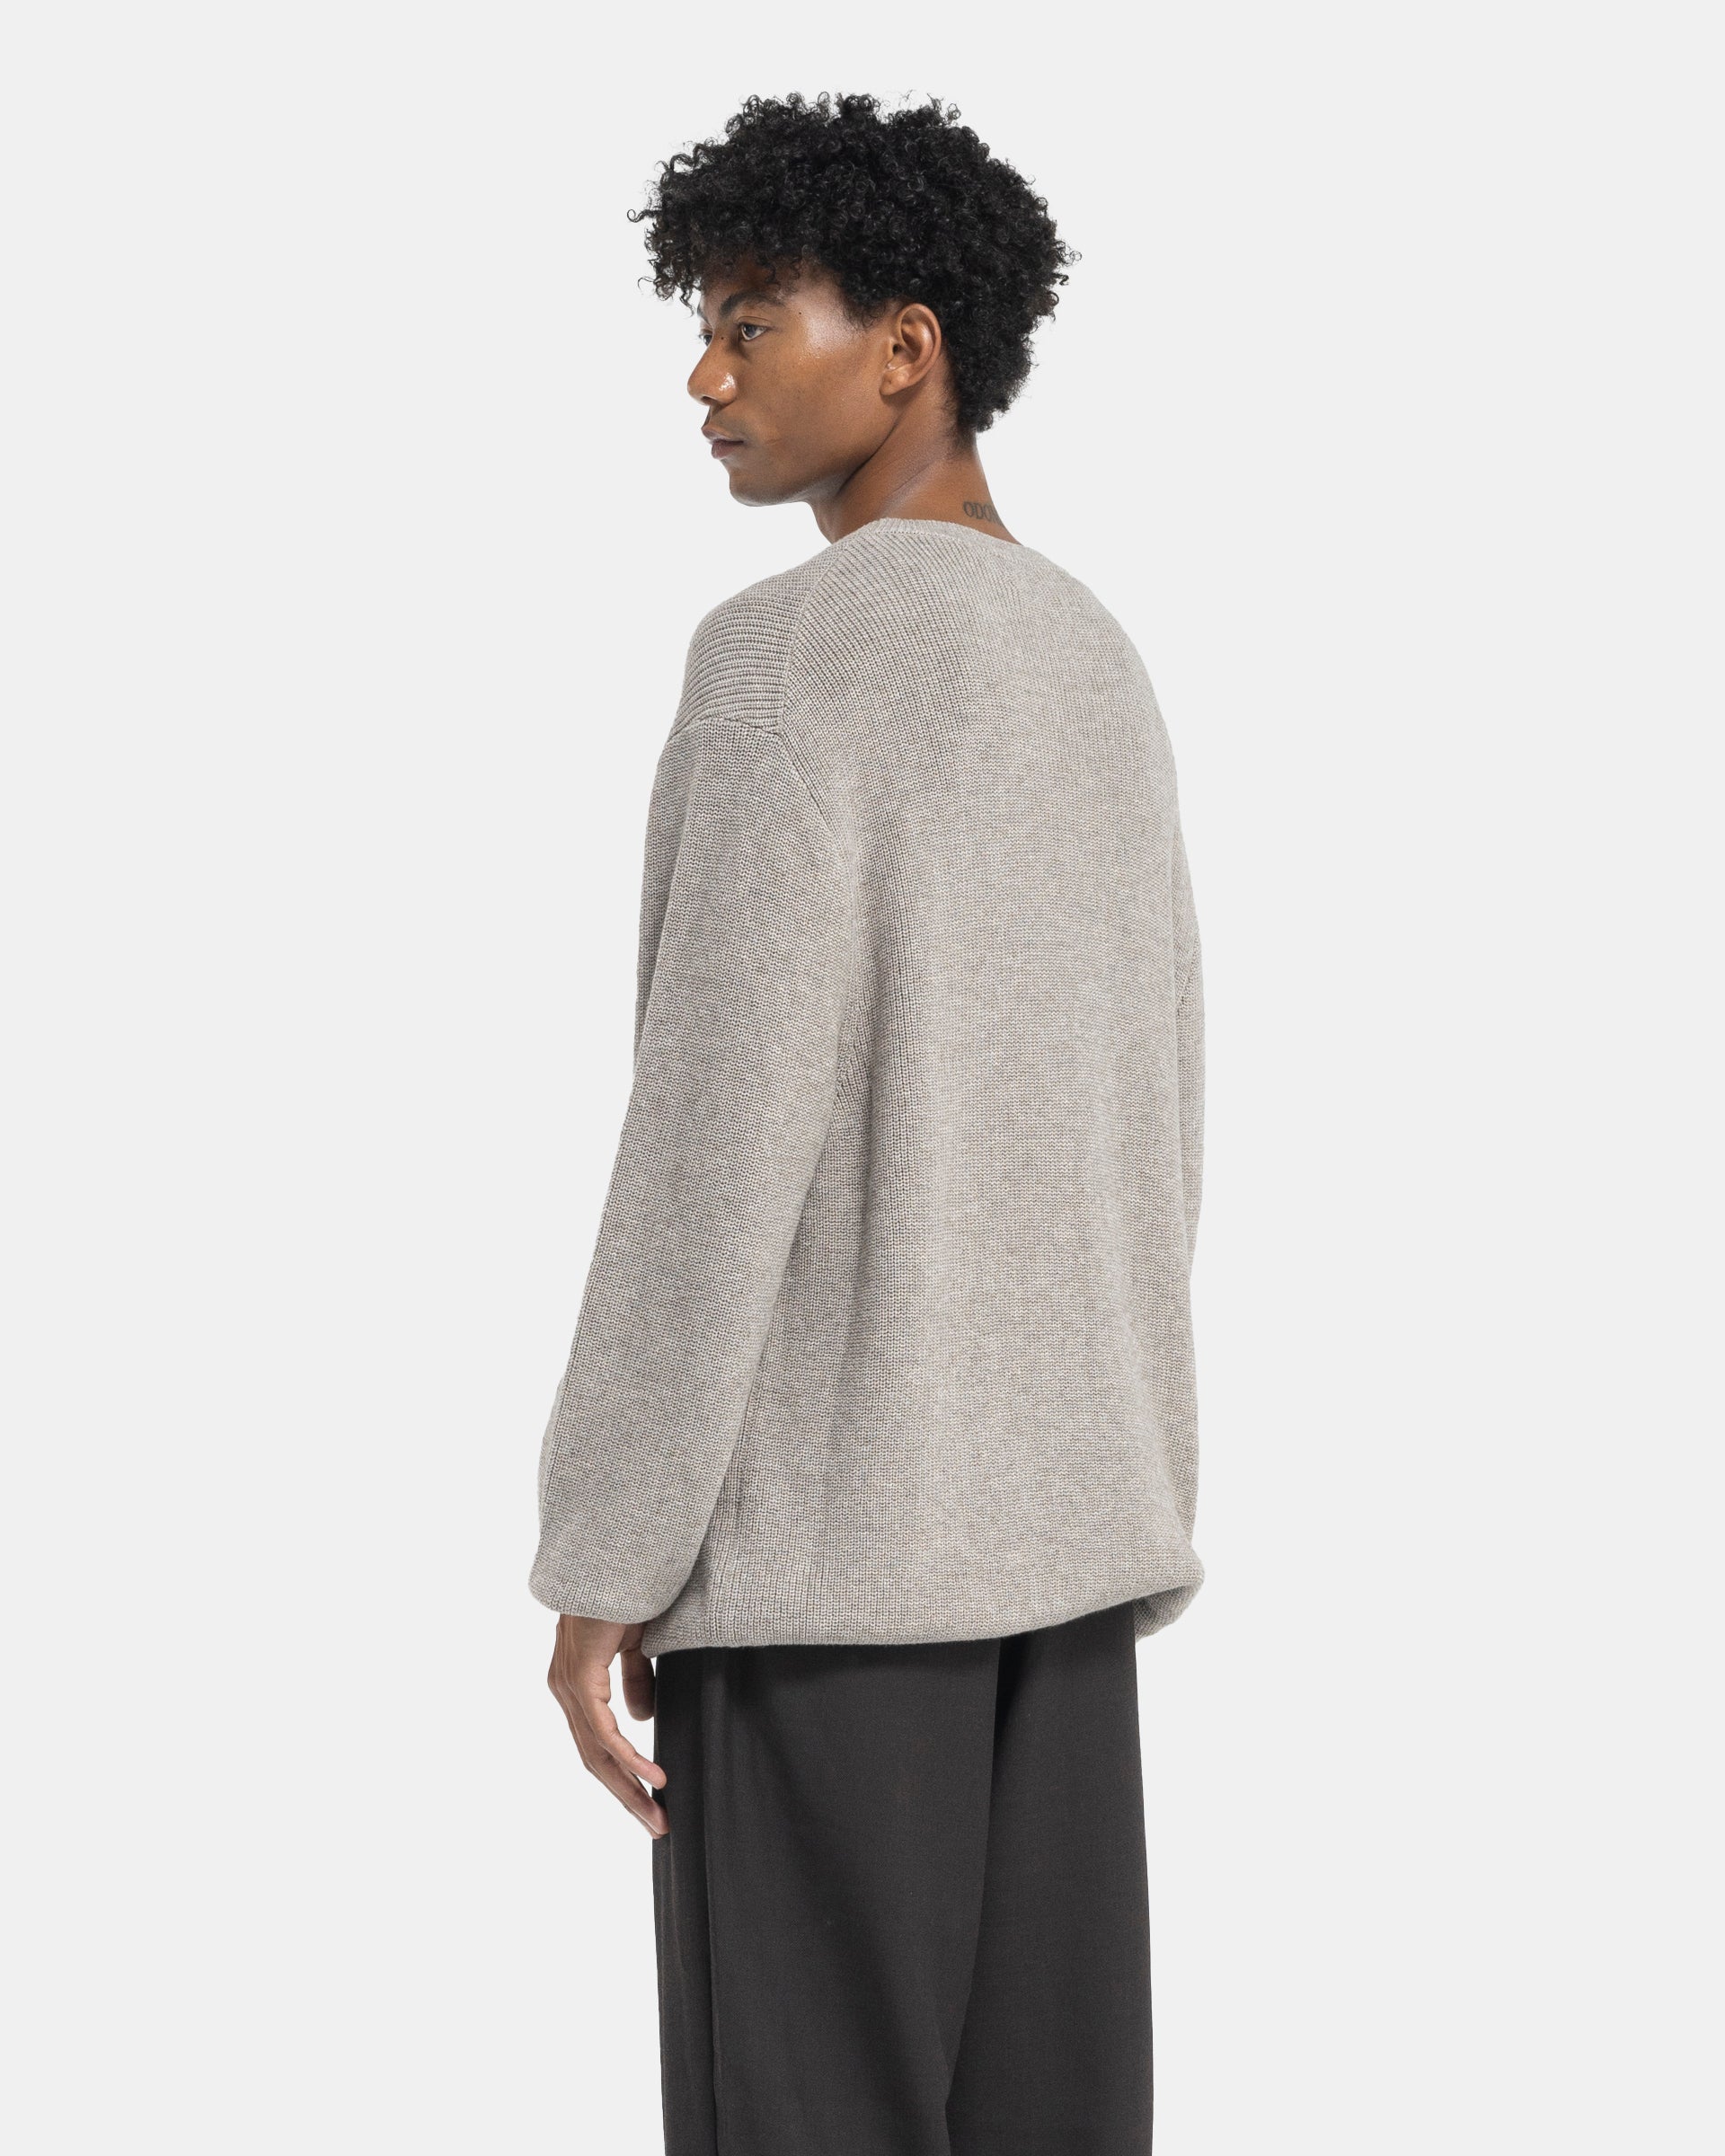 Yak Mix Cotton Sweater in Taupe